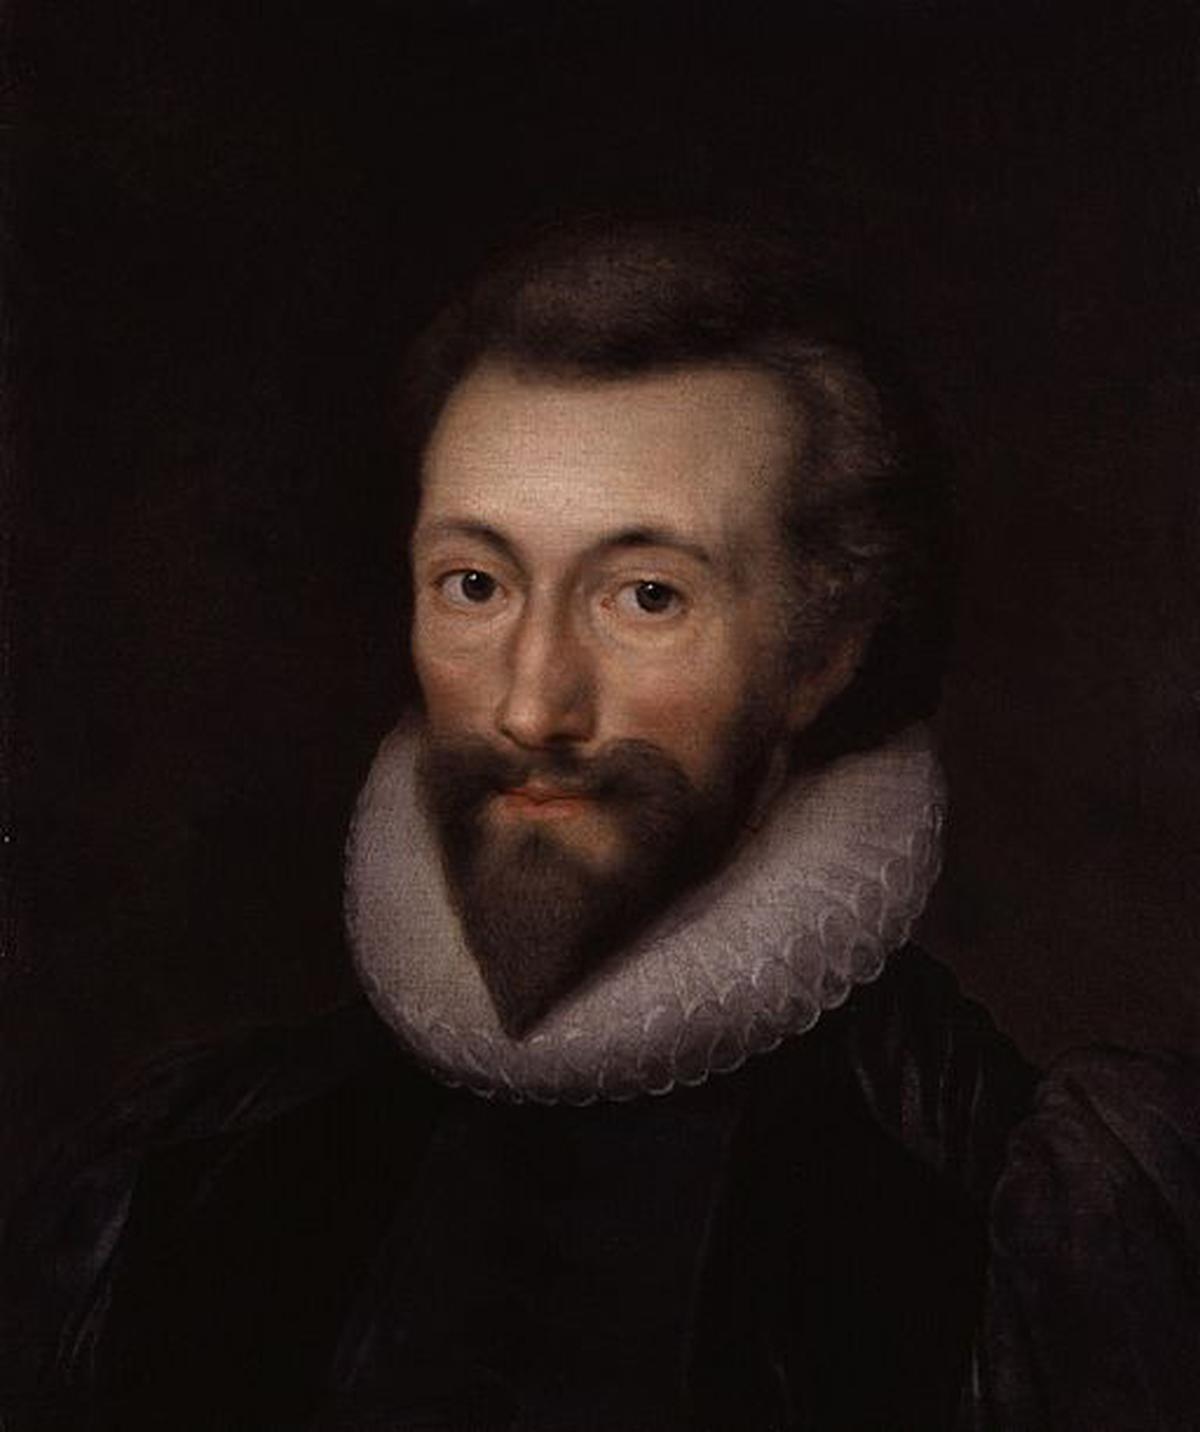 John Donne, late 17th century copy of a 1616 portrait by Isaac Oliver.